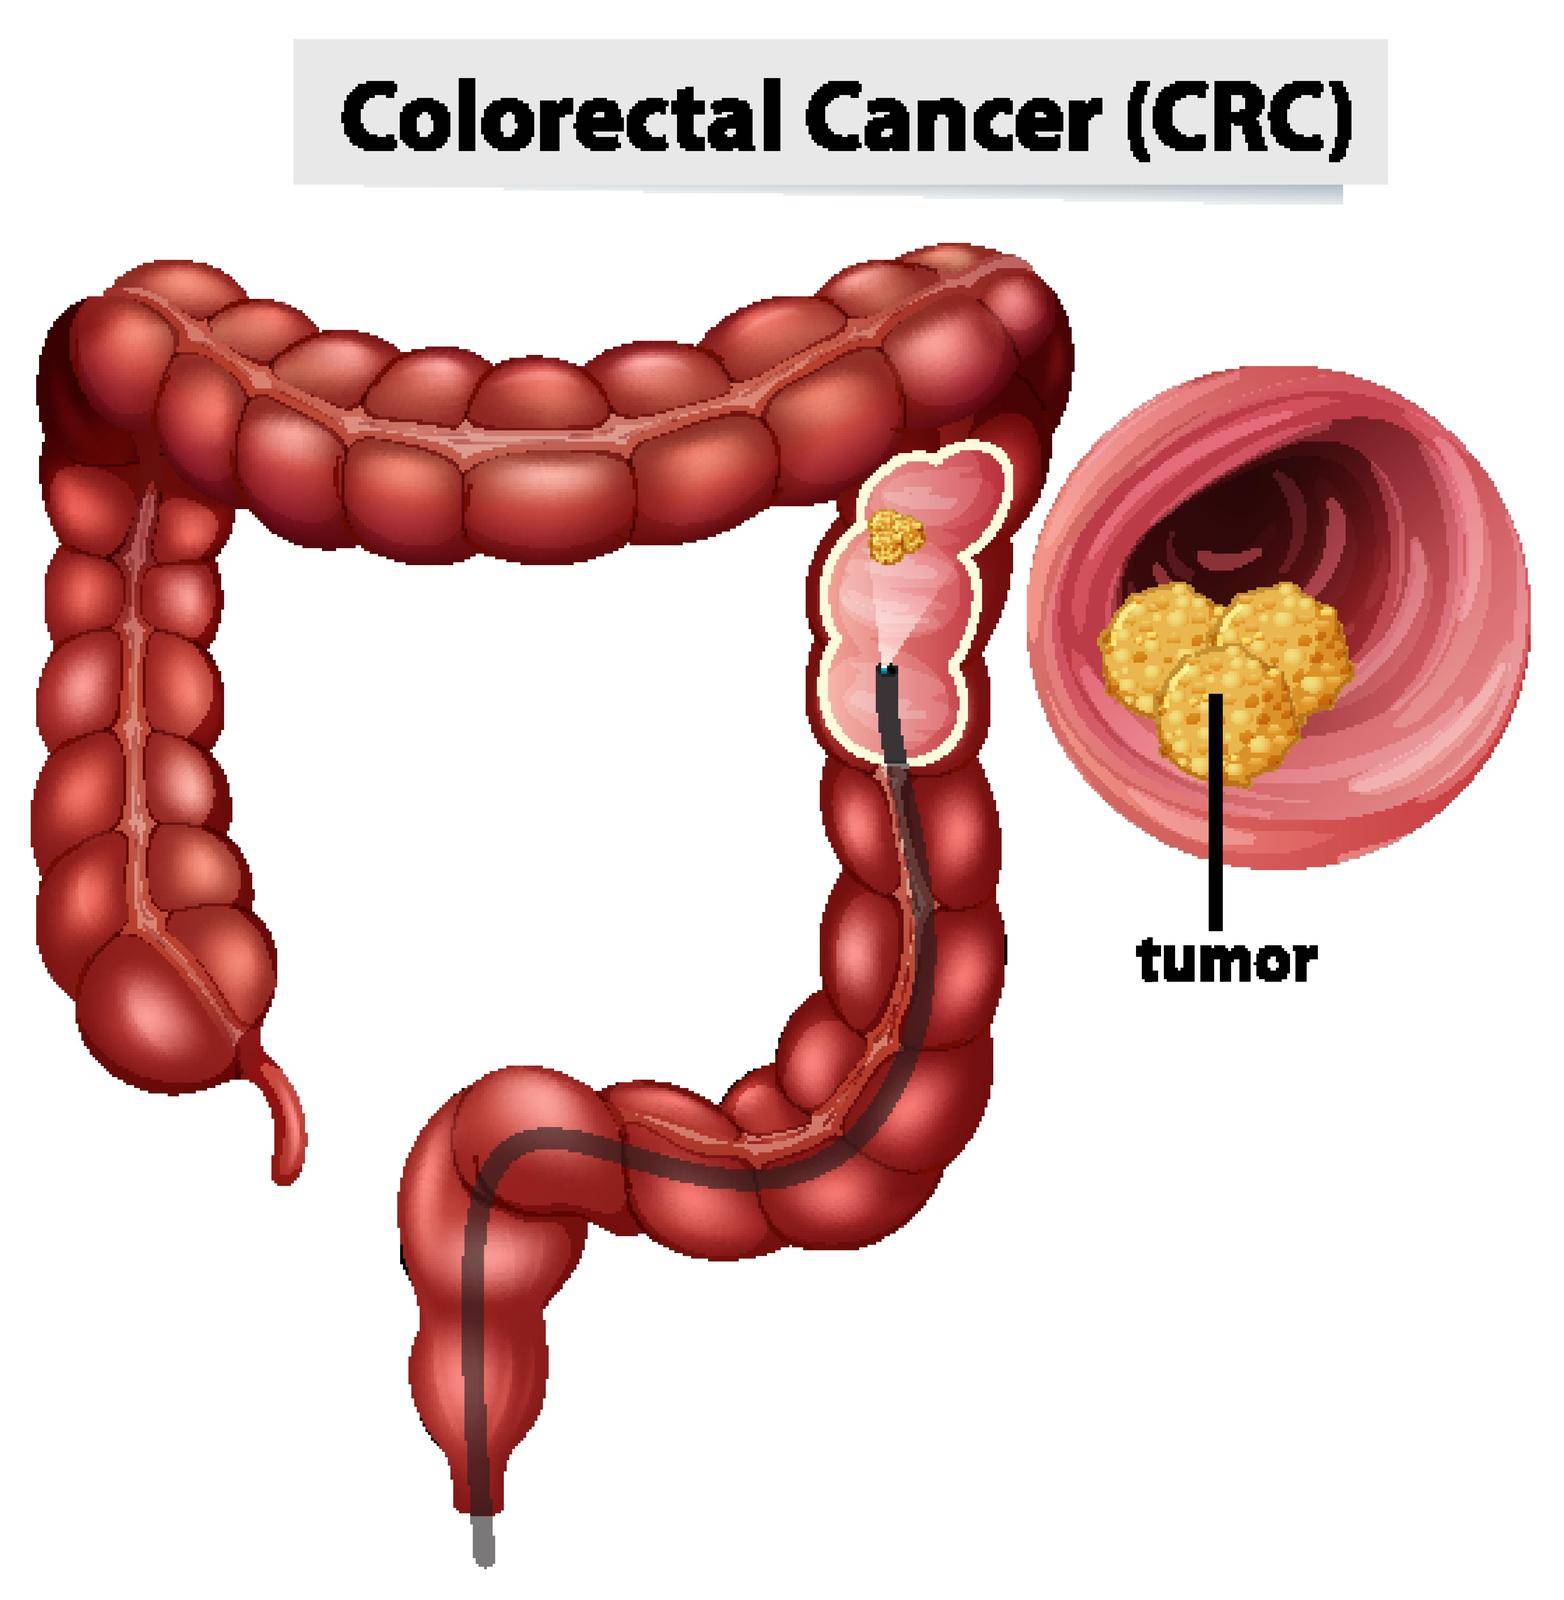 Colorectal Cancer (CRC) infographic for education by iimages